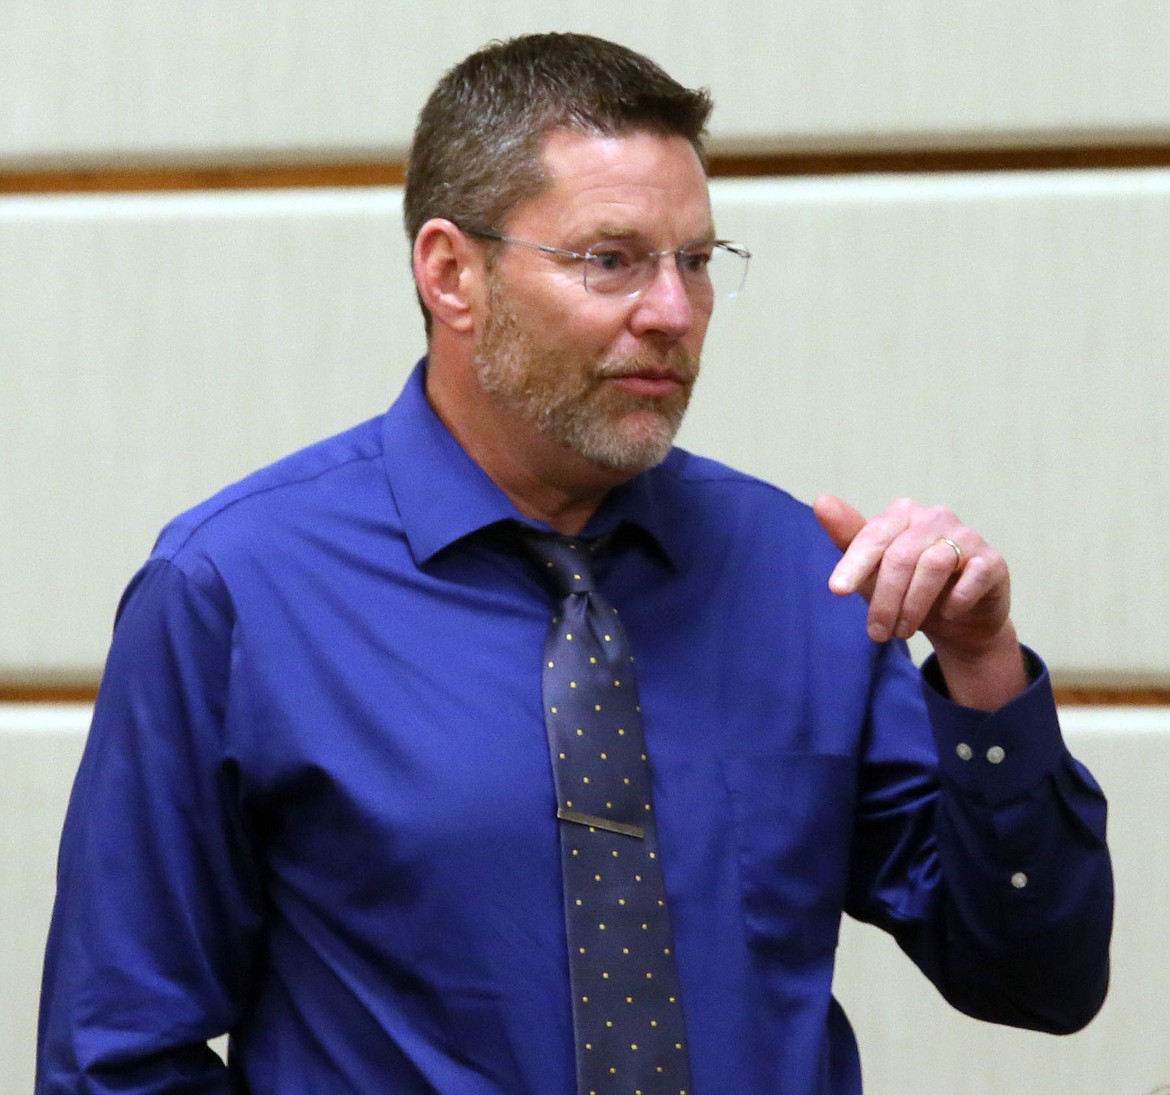 JUDD WILSON/Press
The Coeur d&#146;Alene School District&#146;s new superintendent, Dr. Steve Cook, called for a new state public school funding formula Tuesday.